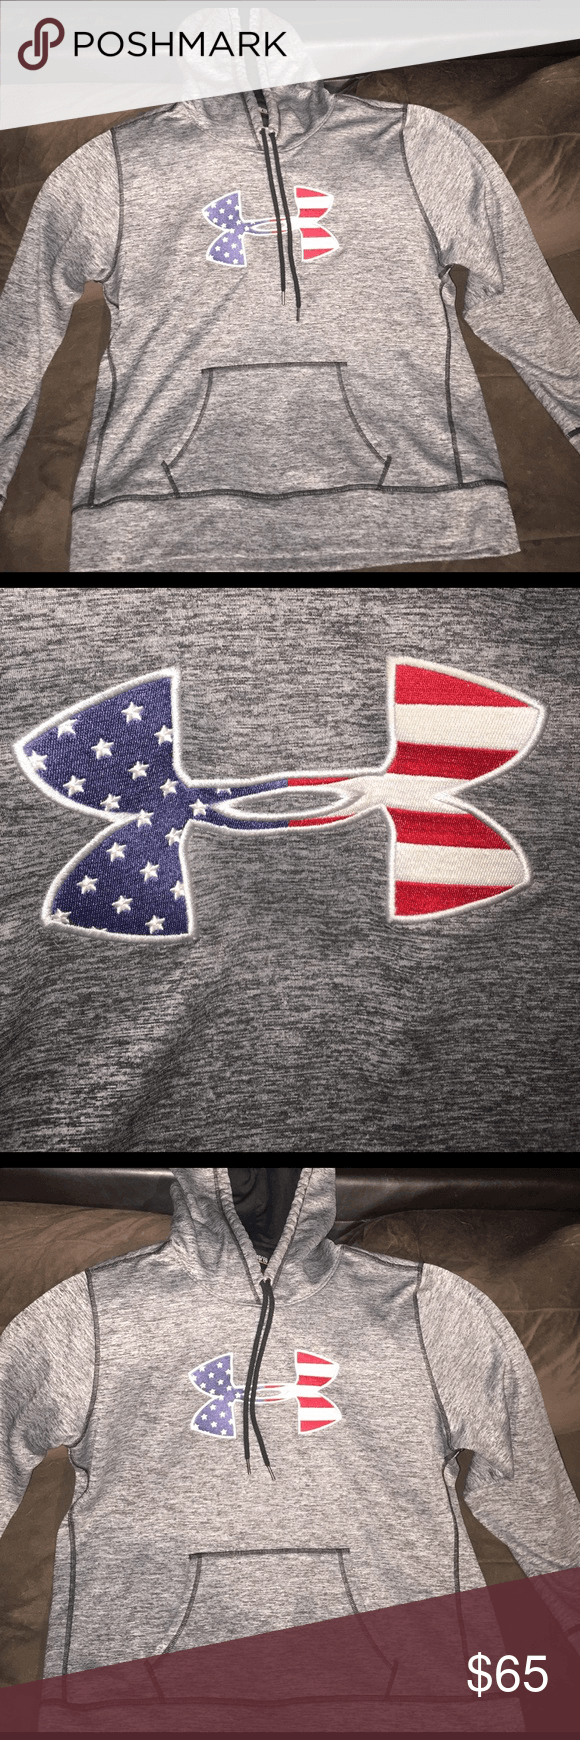 Red and Blue Under Armour Logo - Woman's Under Armour Sweatshirt American Flag Logo Under Armour Gray ...